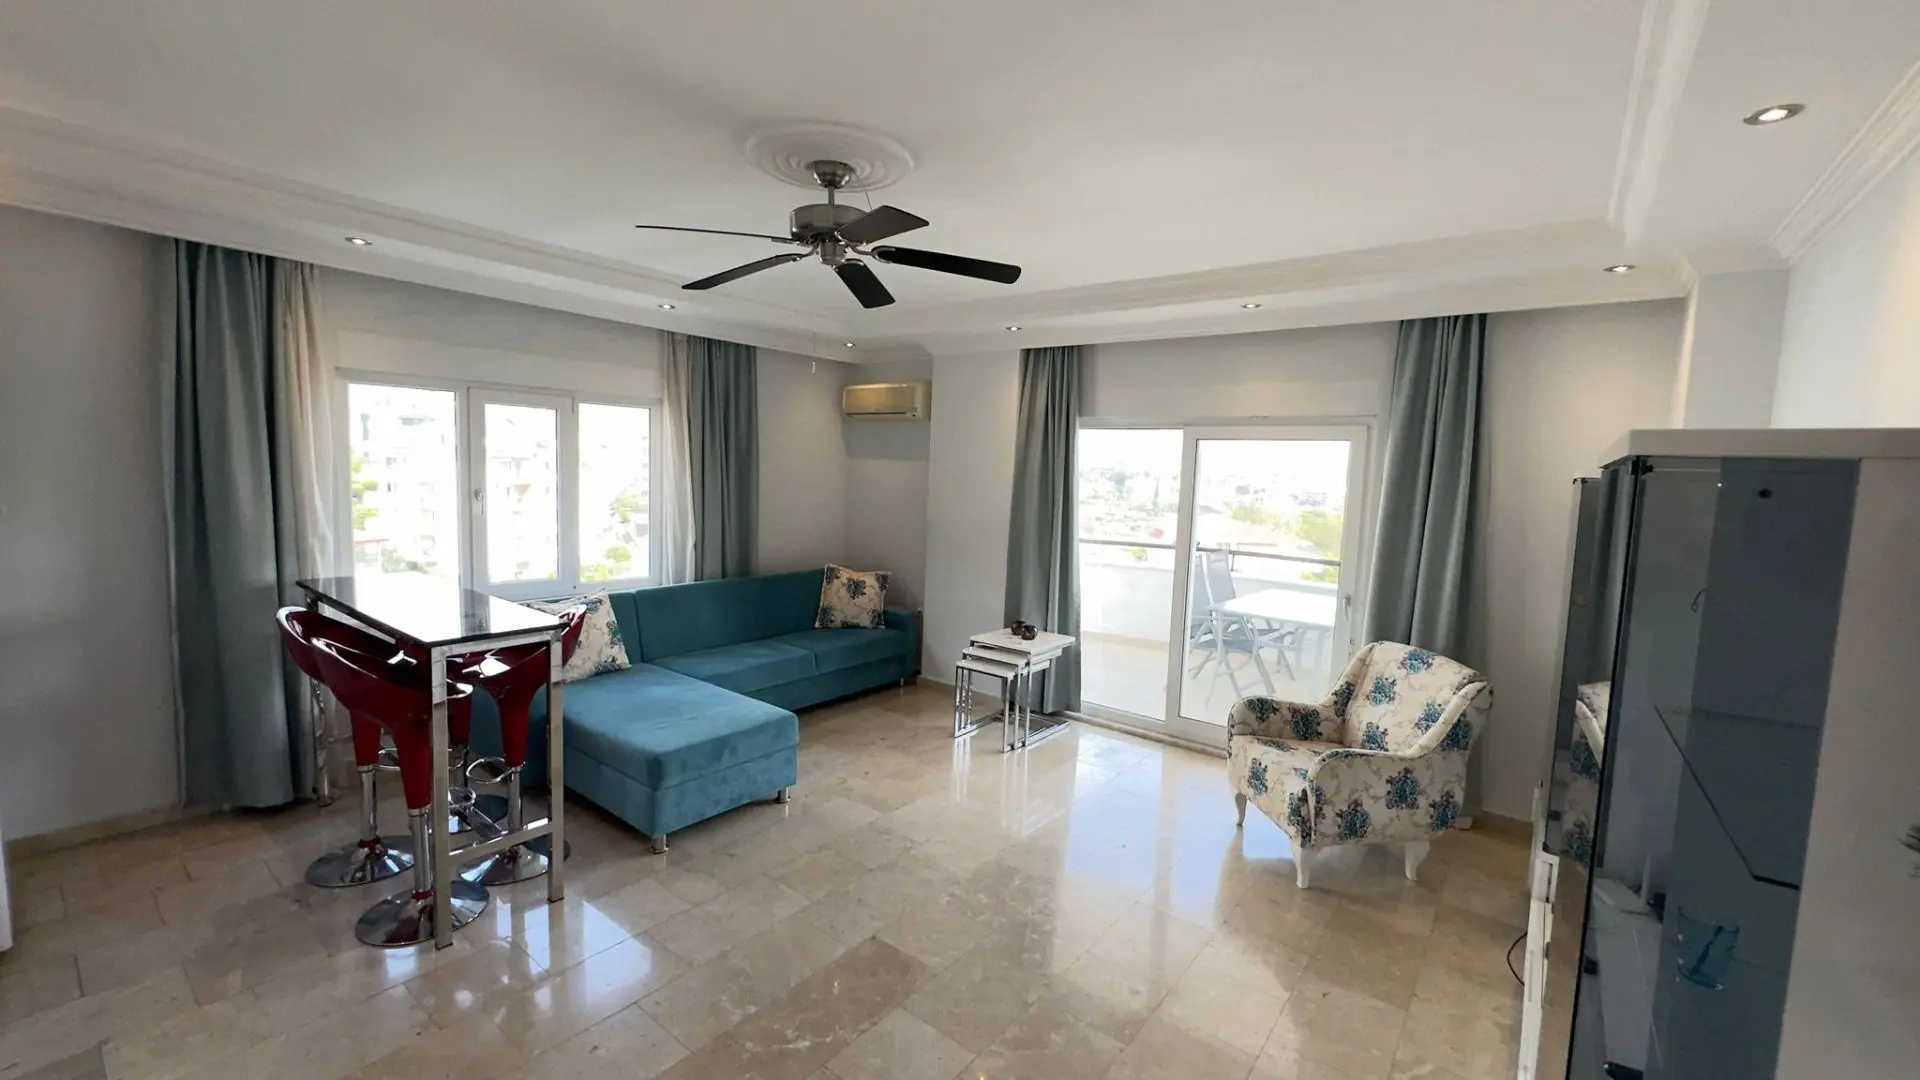 2+1 FULLY FURNISHED FLAT FOR SALE IN ALANYA CİKCİLLİ 100m²